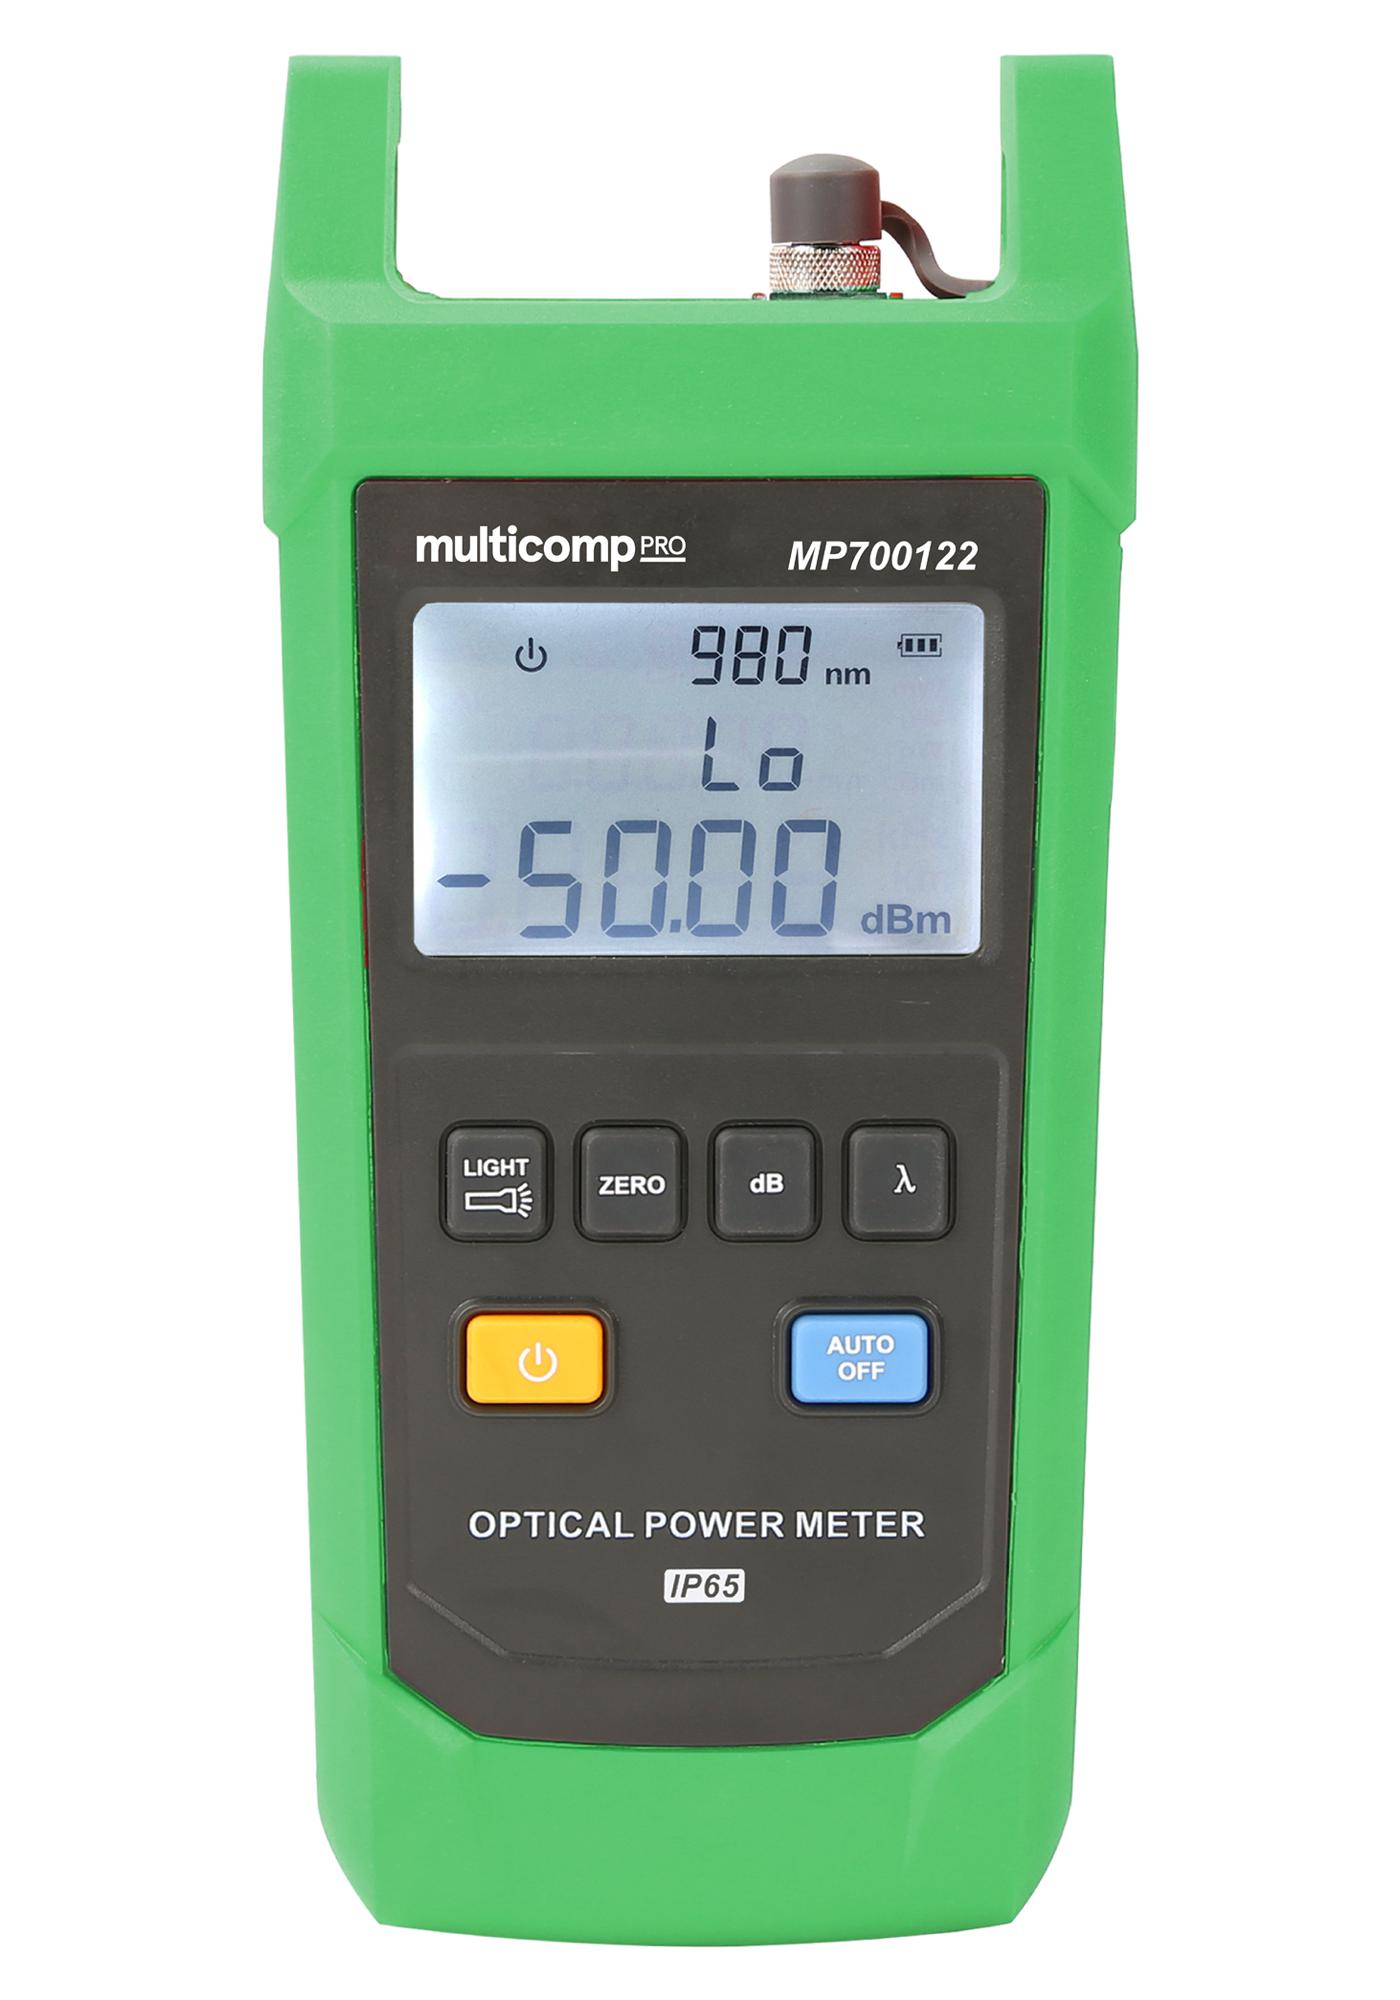 MP700122 OPTICAL POWER METER, HH, -50 TO 26DBM MULTICOMP PRO